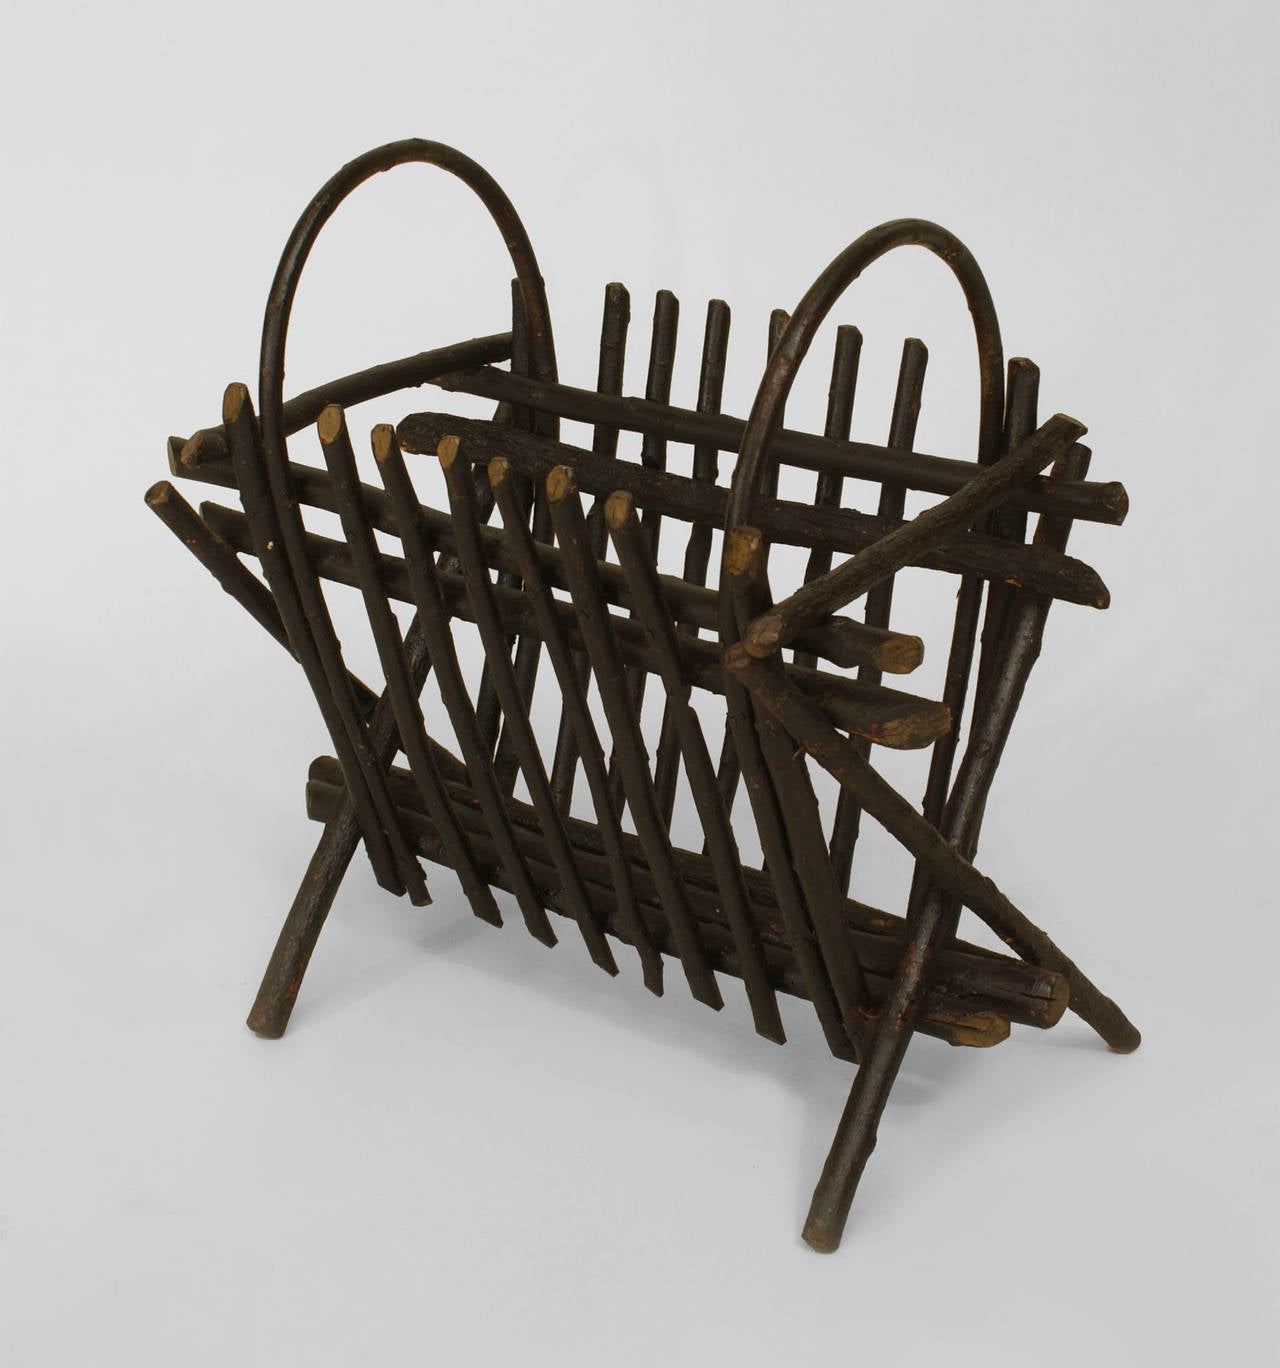 Rustic Adirondack (20th Cent) willow twig design canterbury/magazine rack
with slat sides and hoops on the ends.